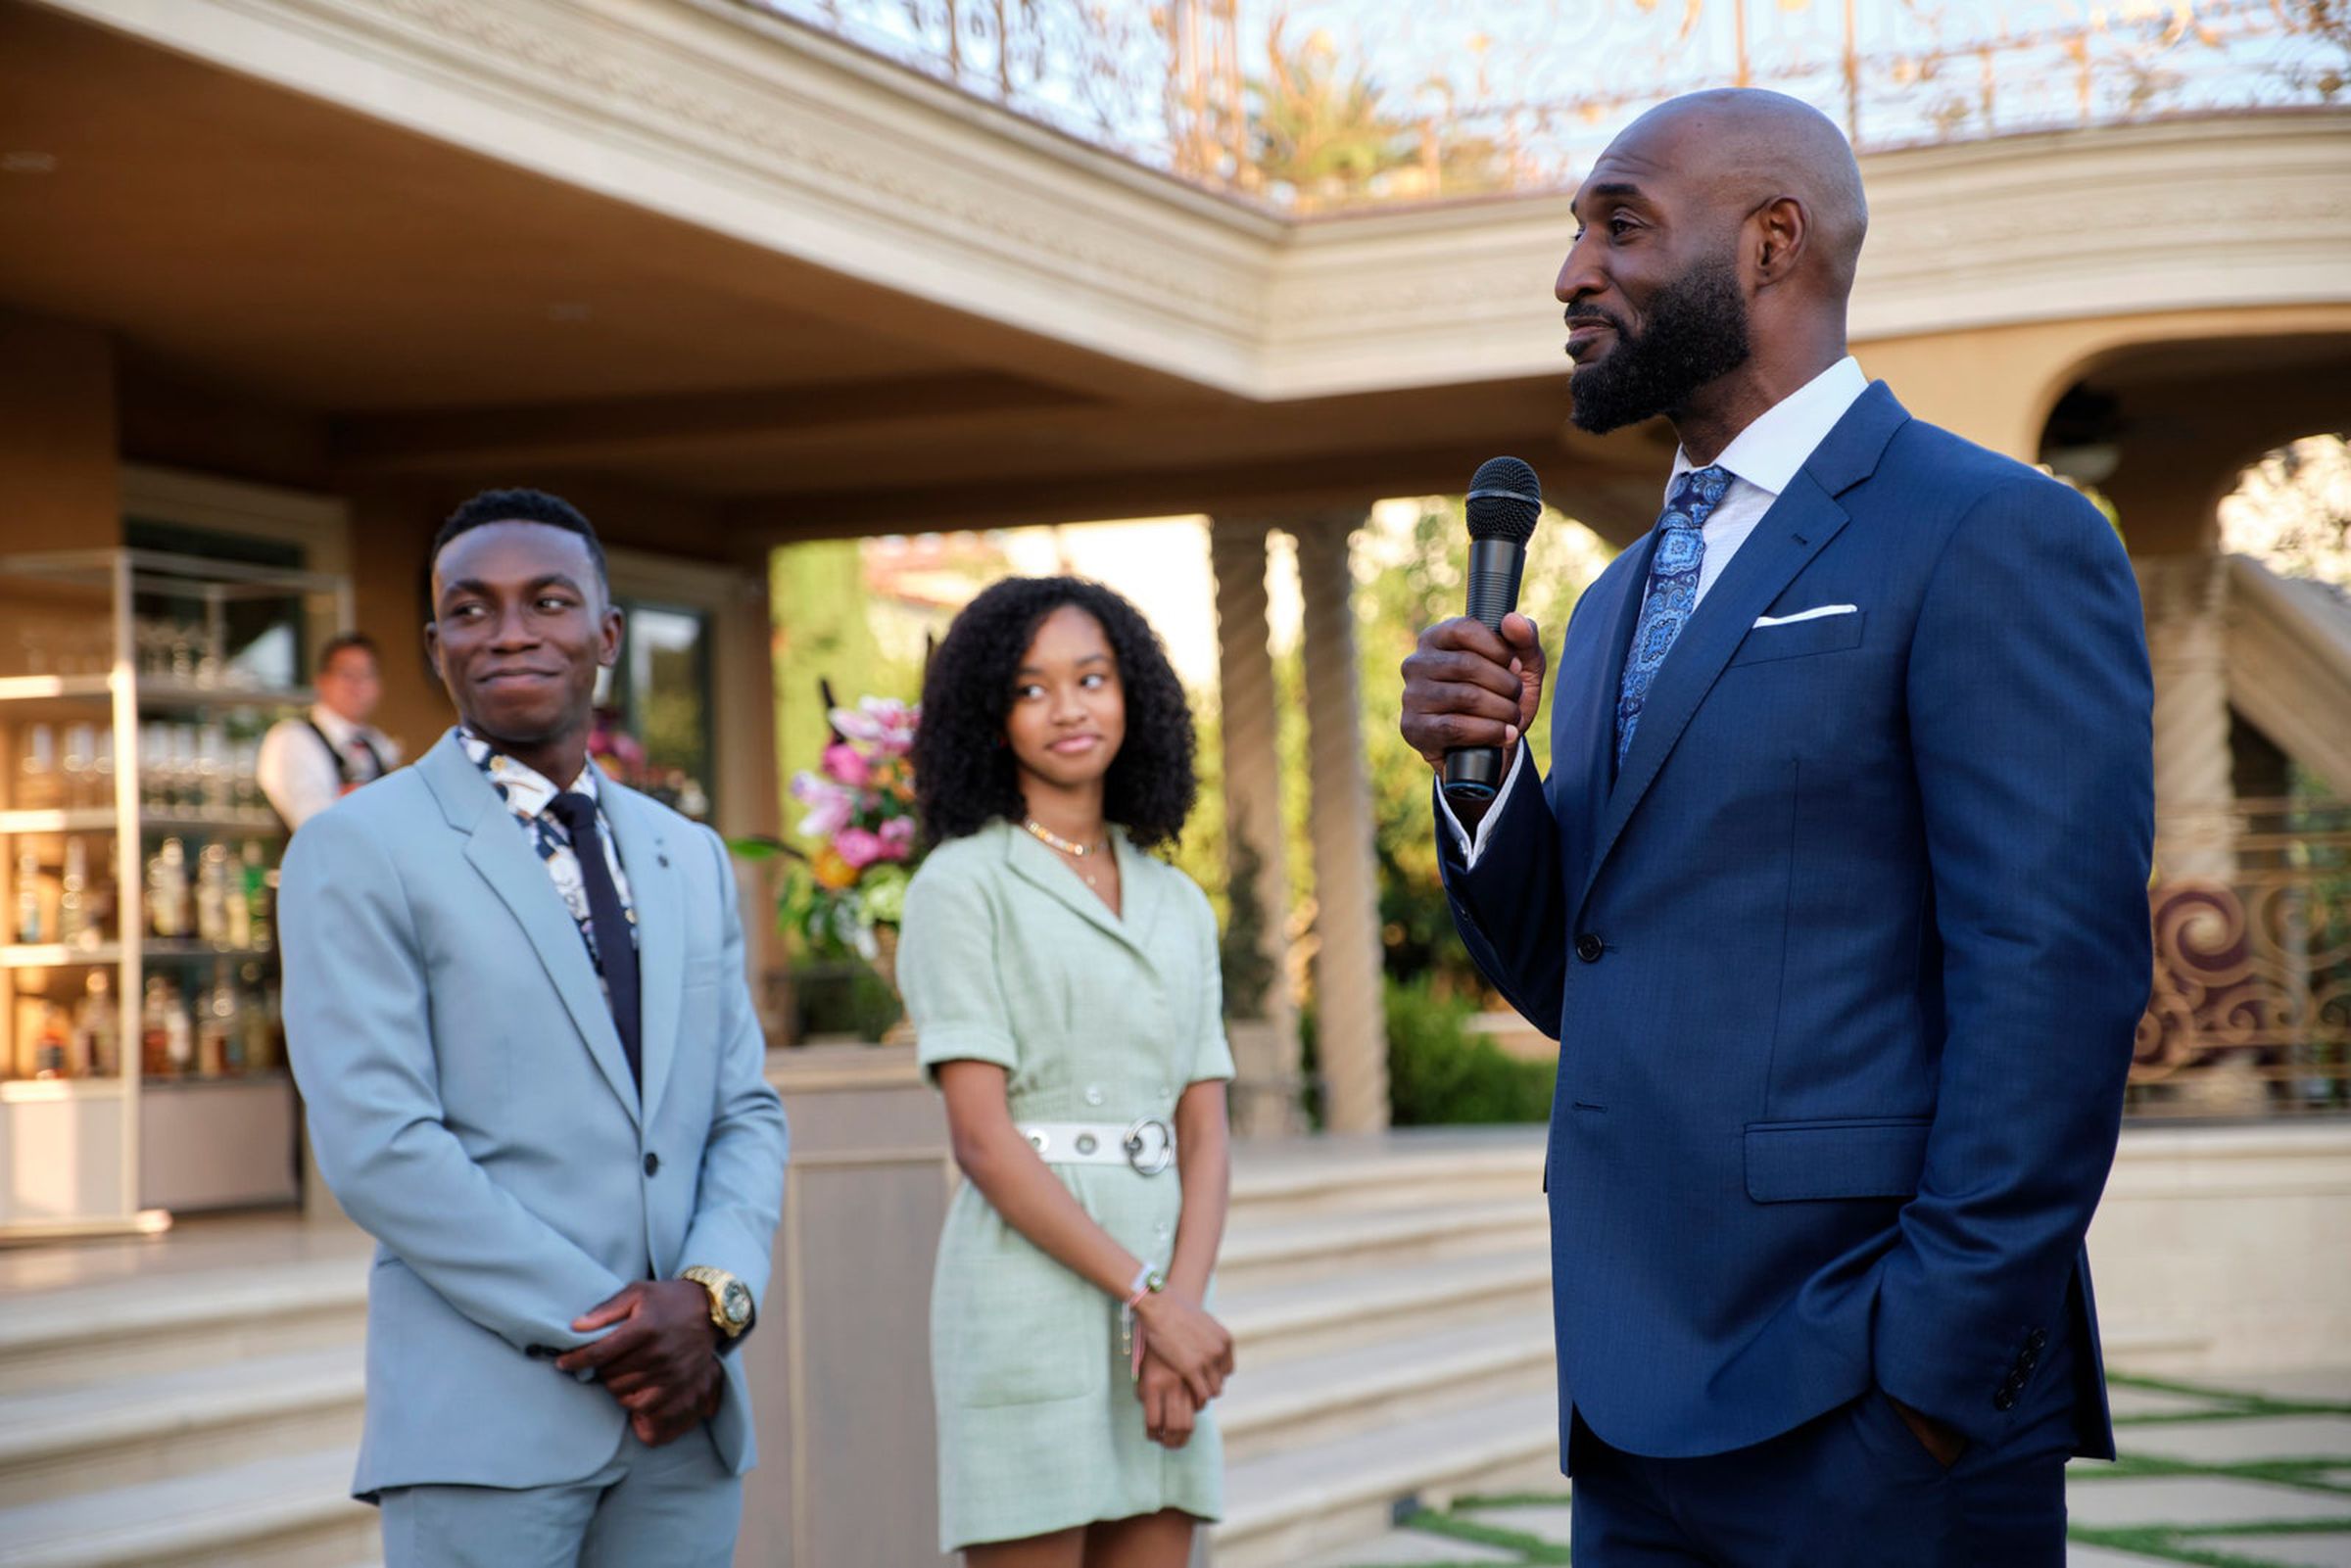 Phil Banks speaking at at an event alongside his children.